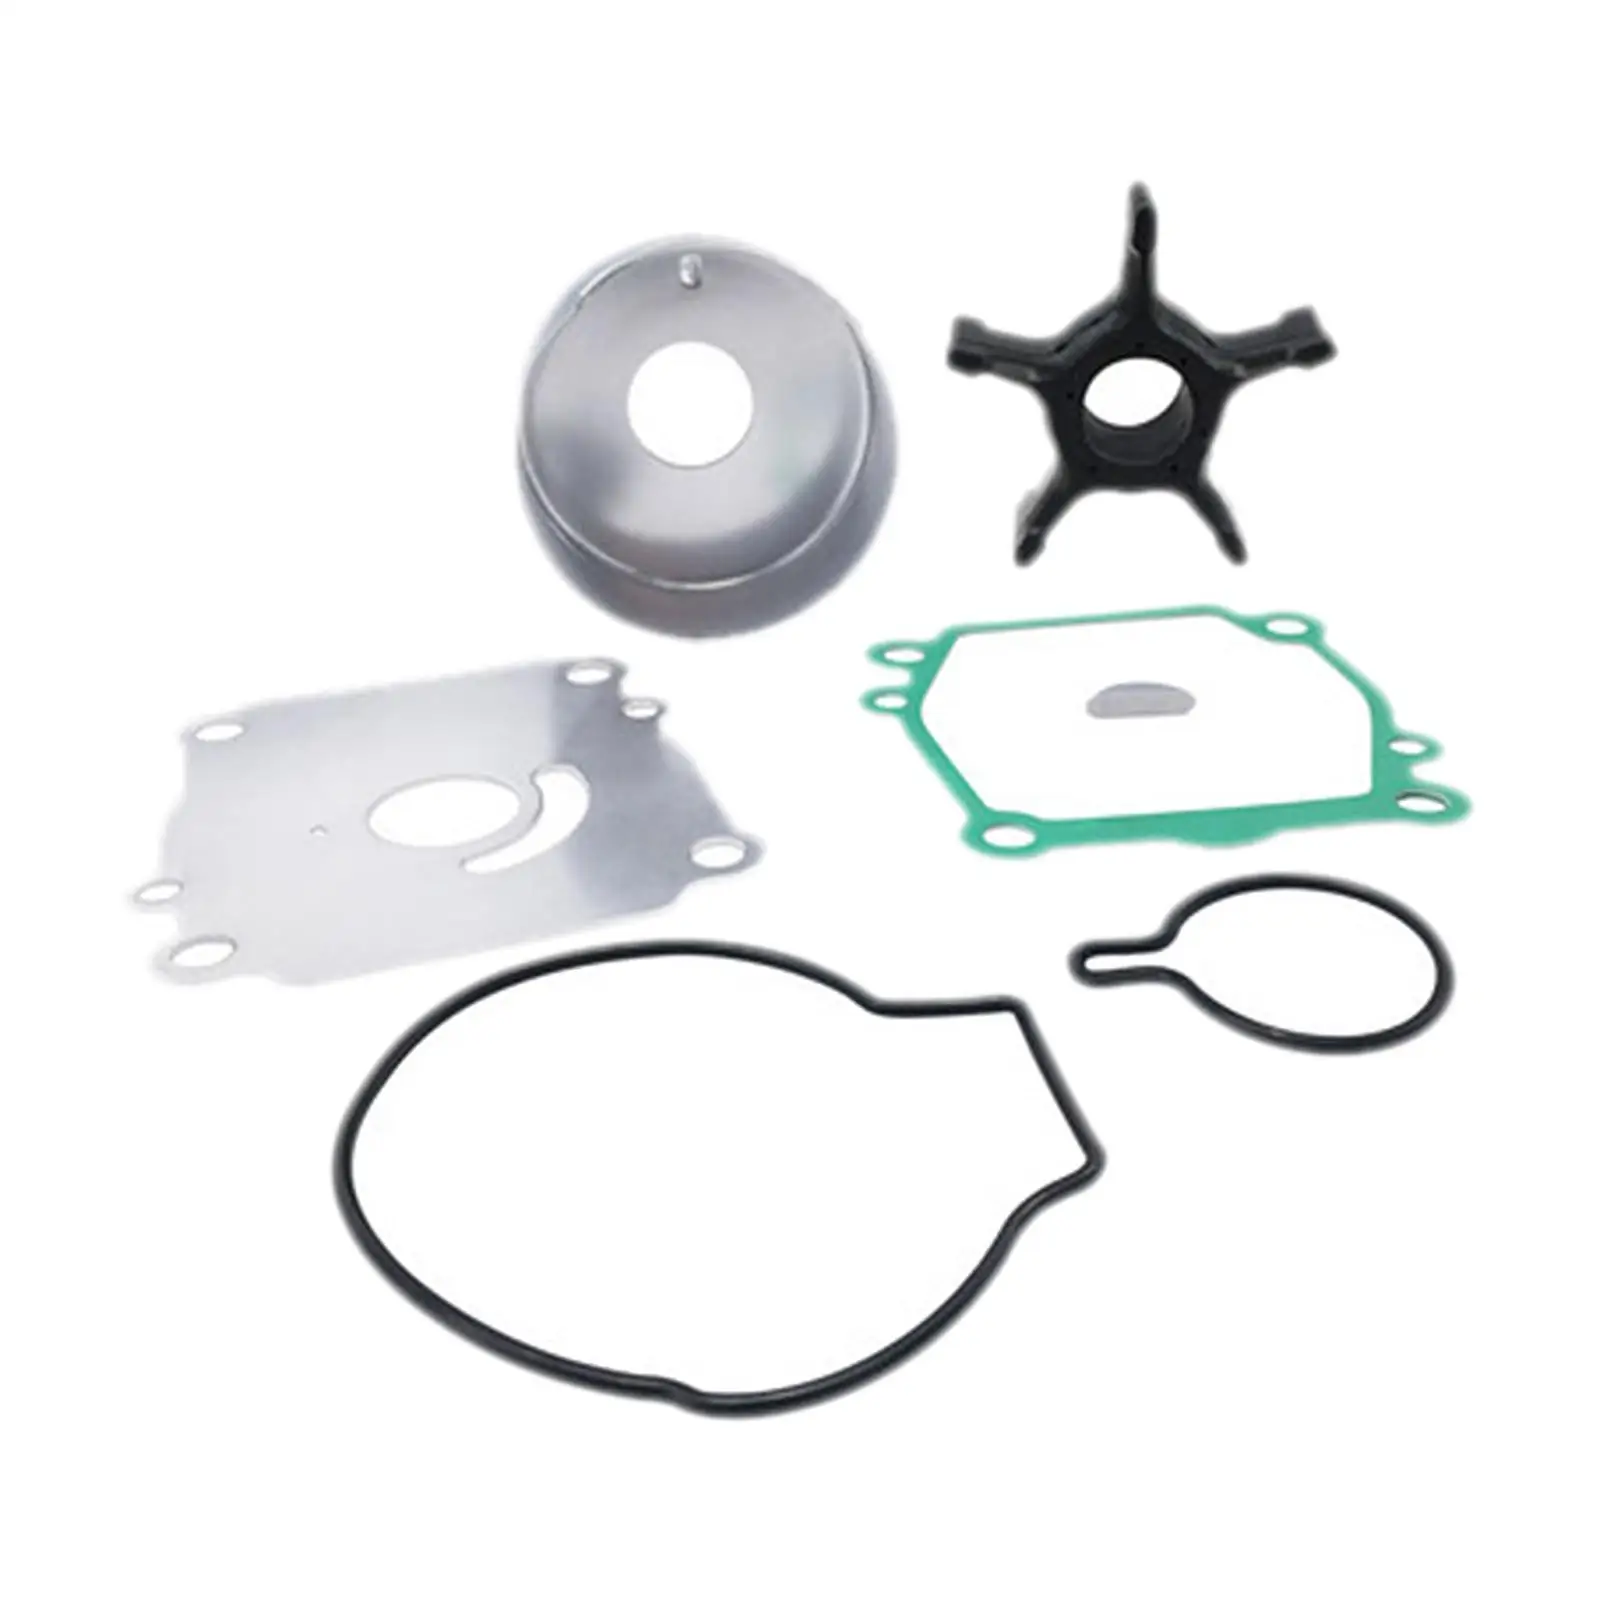 Water Pump Repair Set 17400-92J00 for Suzuki Outboards Spare Parts Compact